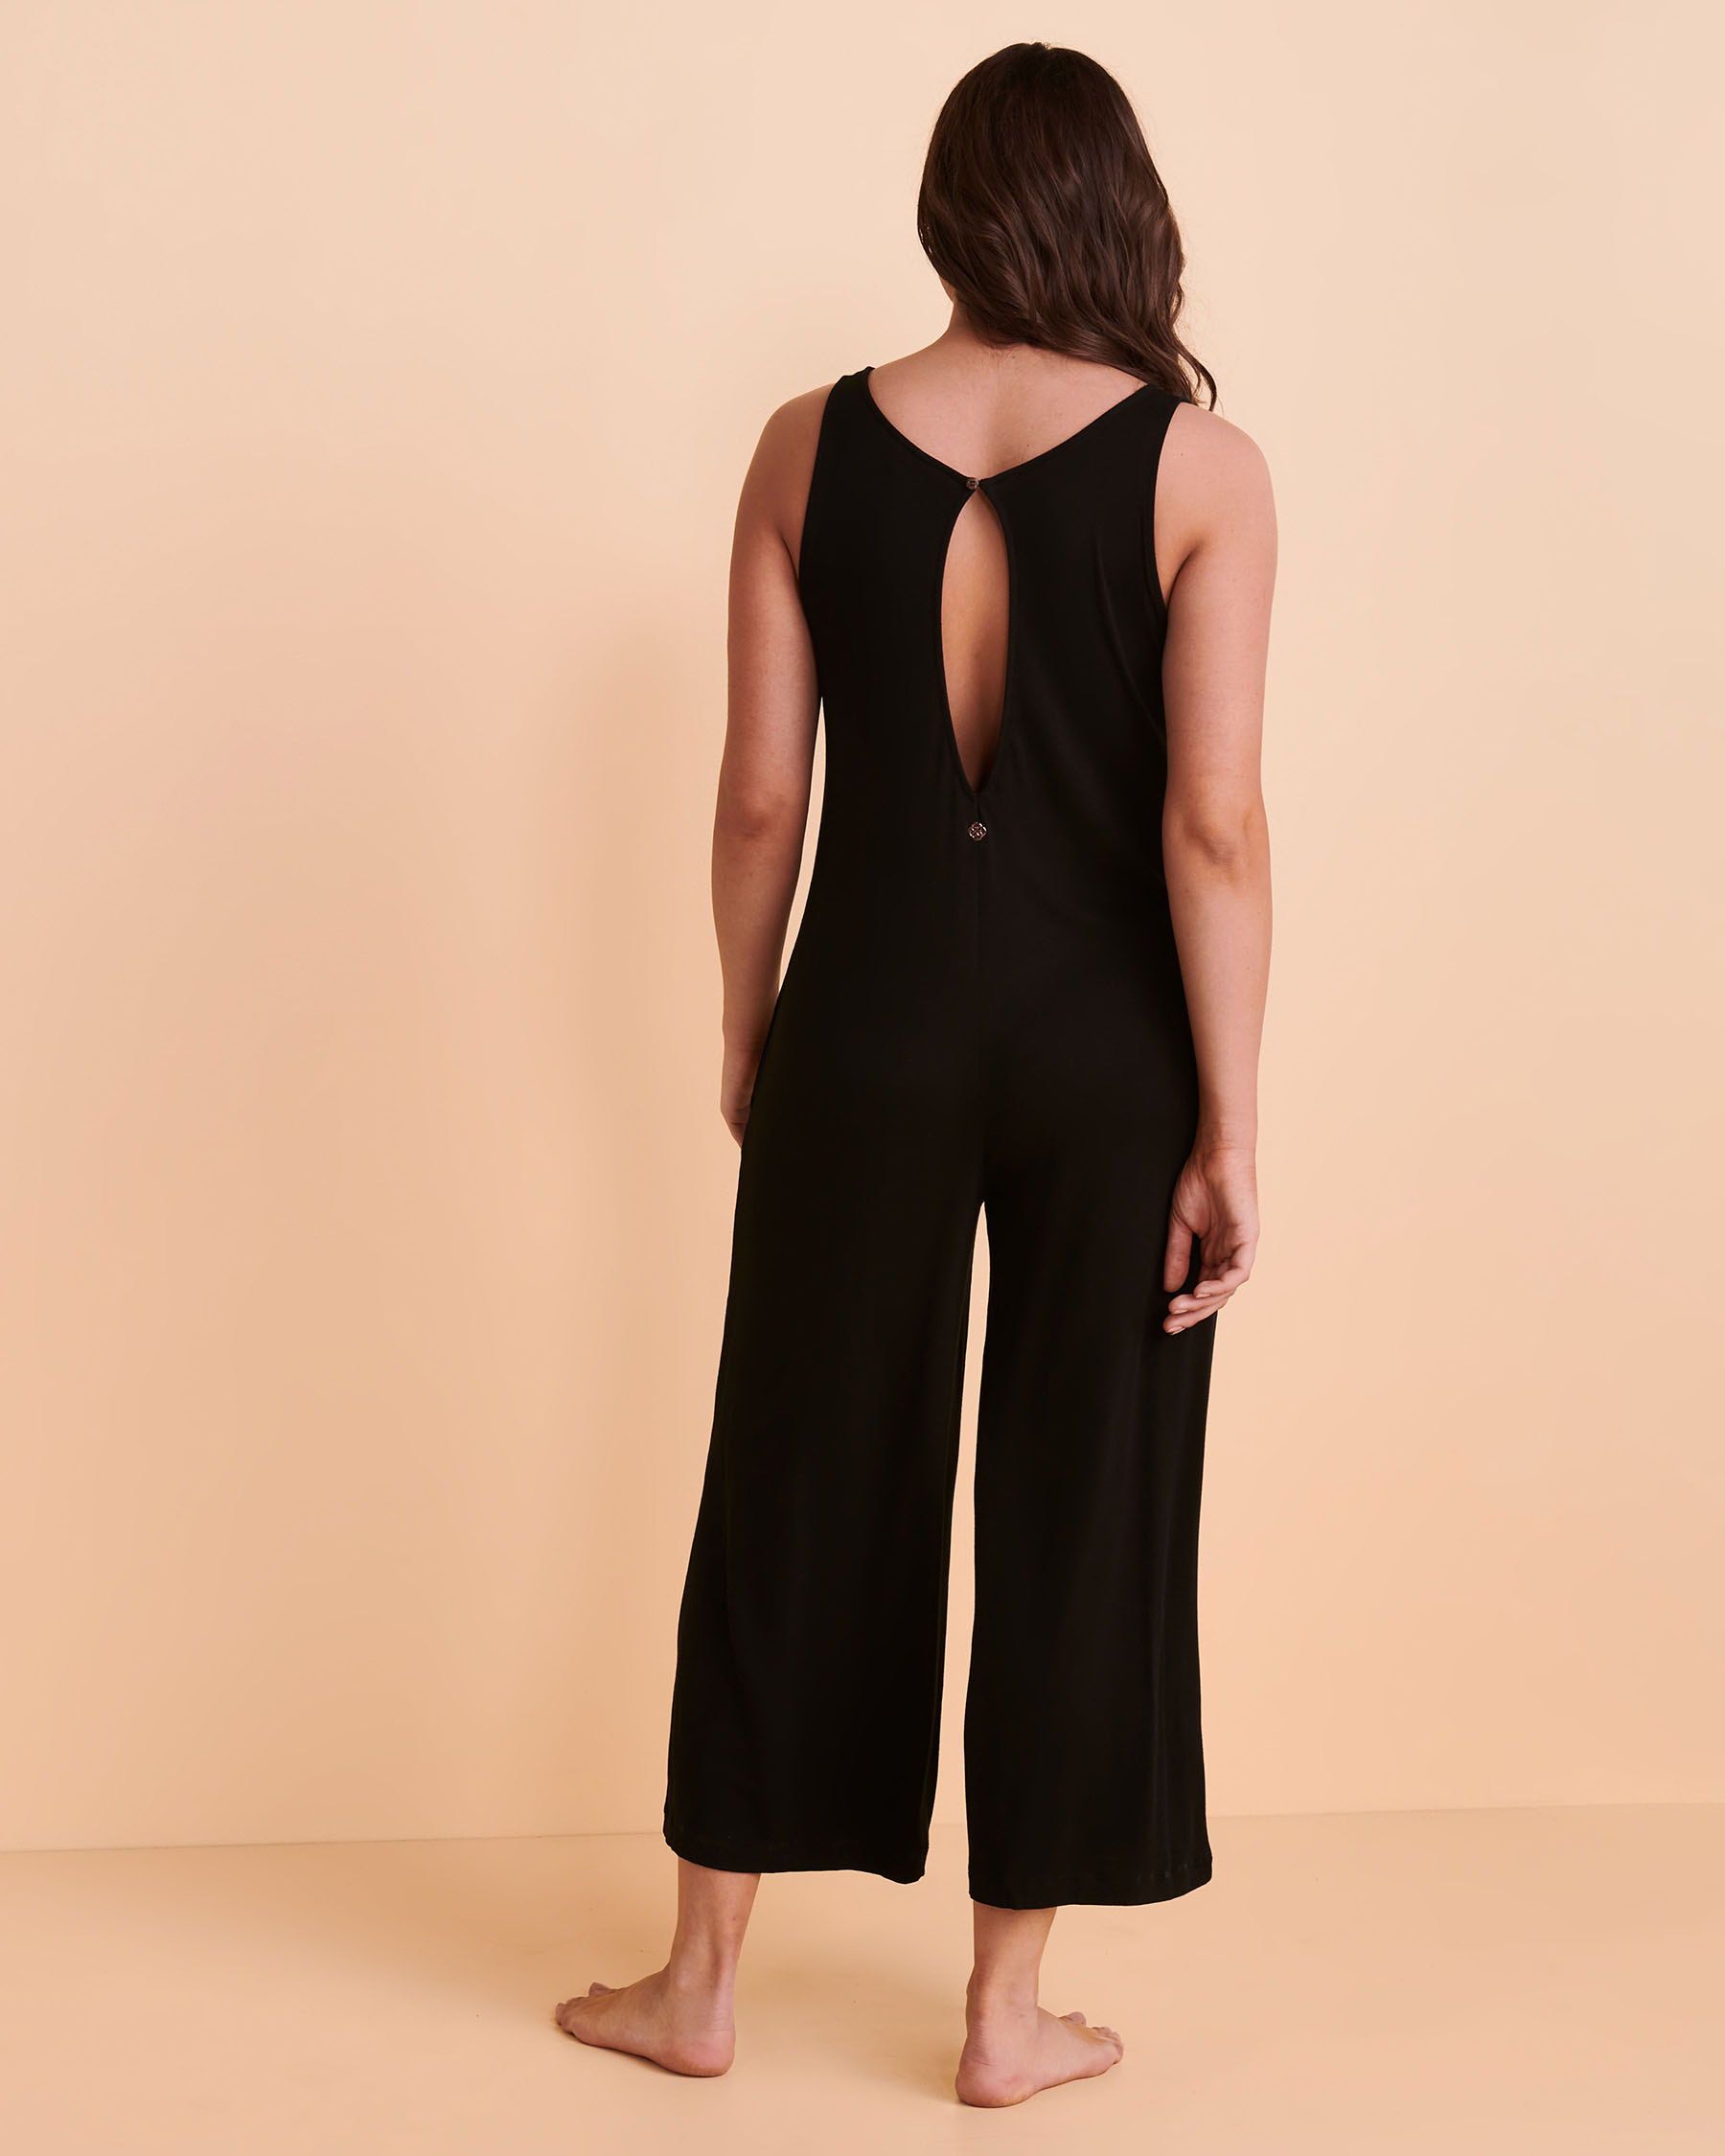 TURQUOISE COUTURE Sleeveless Jumpsuit Black 02300053 - View2